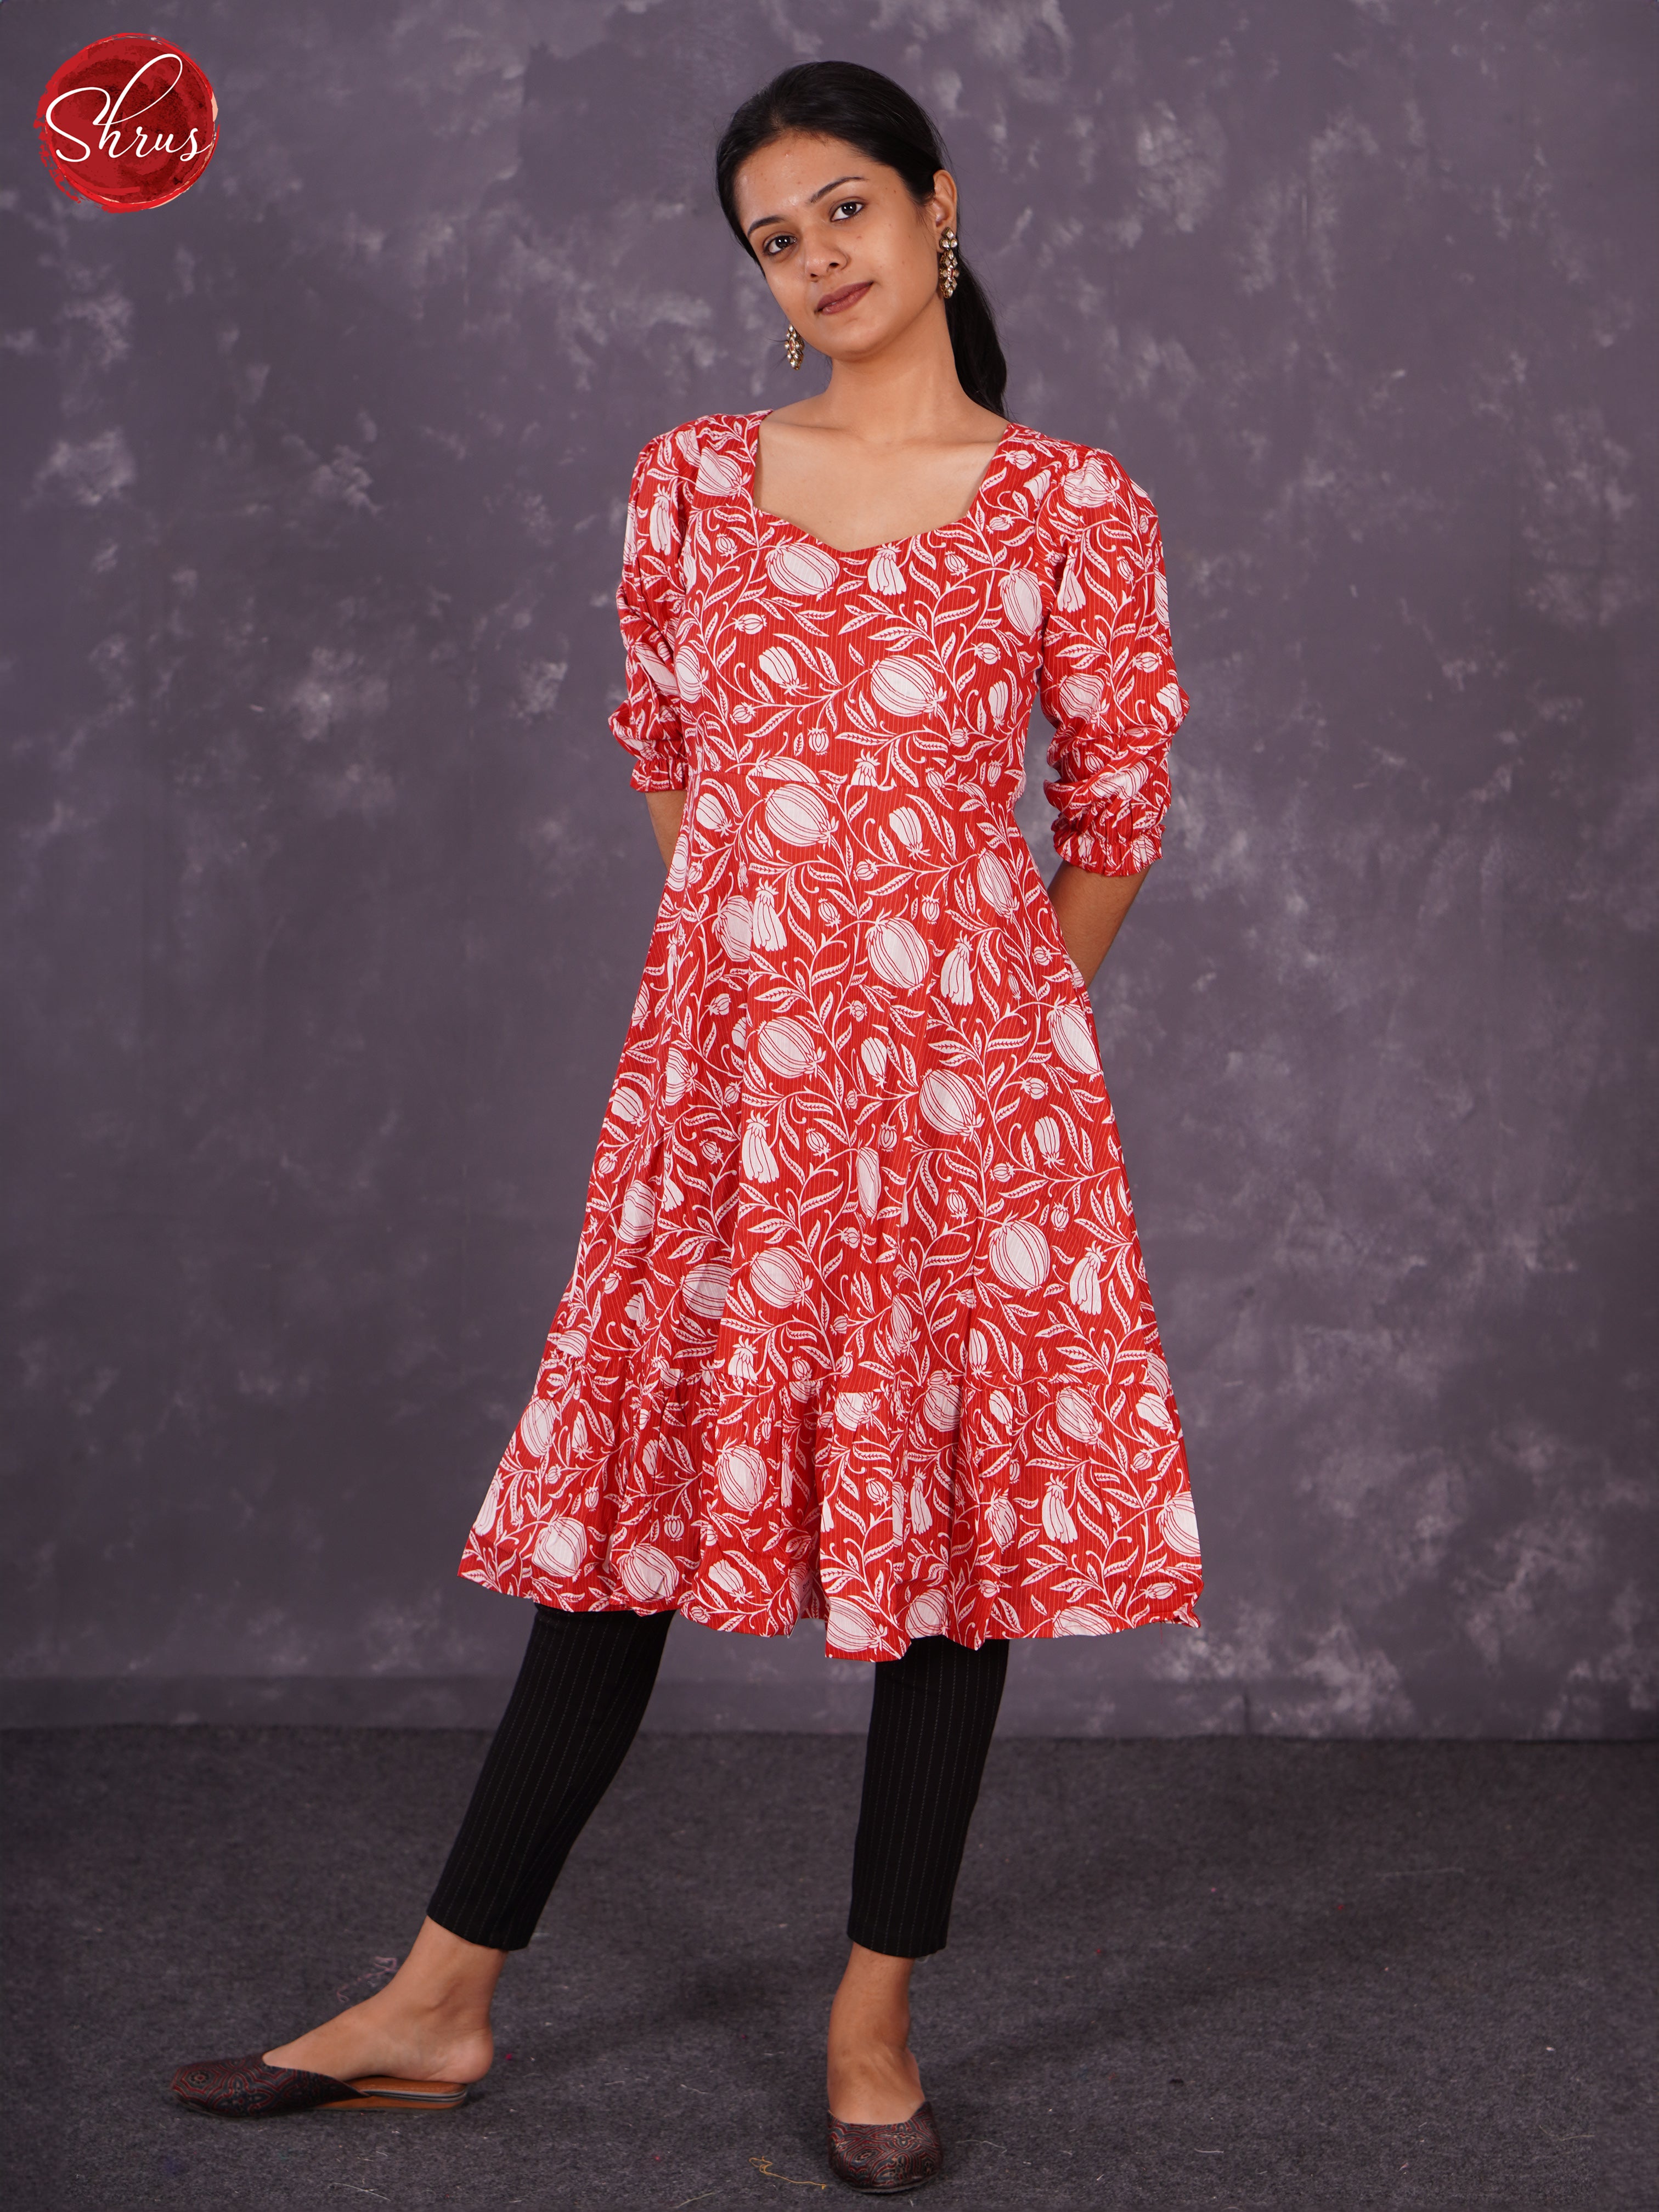 Red - Readymade kurti  with floral print , frilled pattern - Shop on ShrusEternity.com